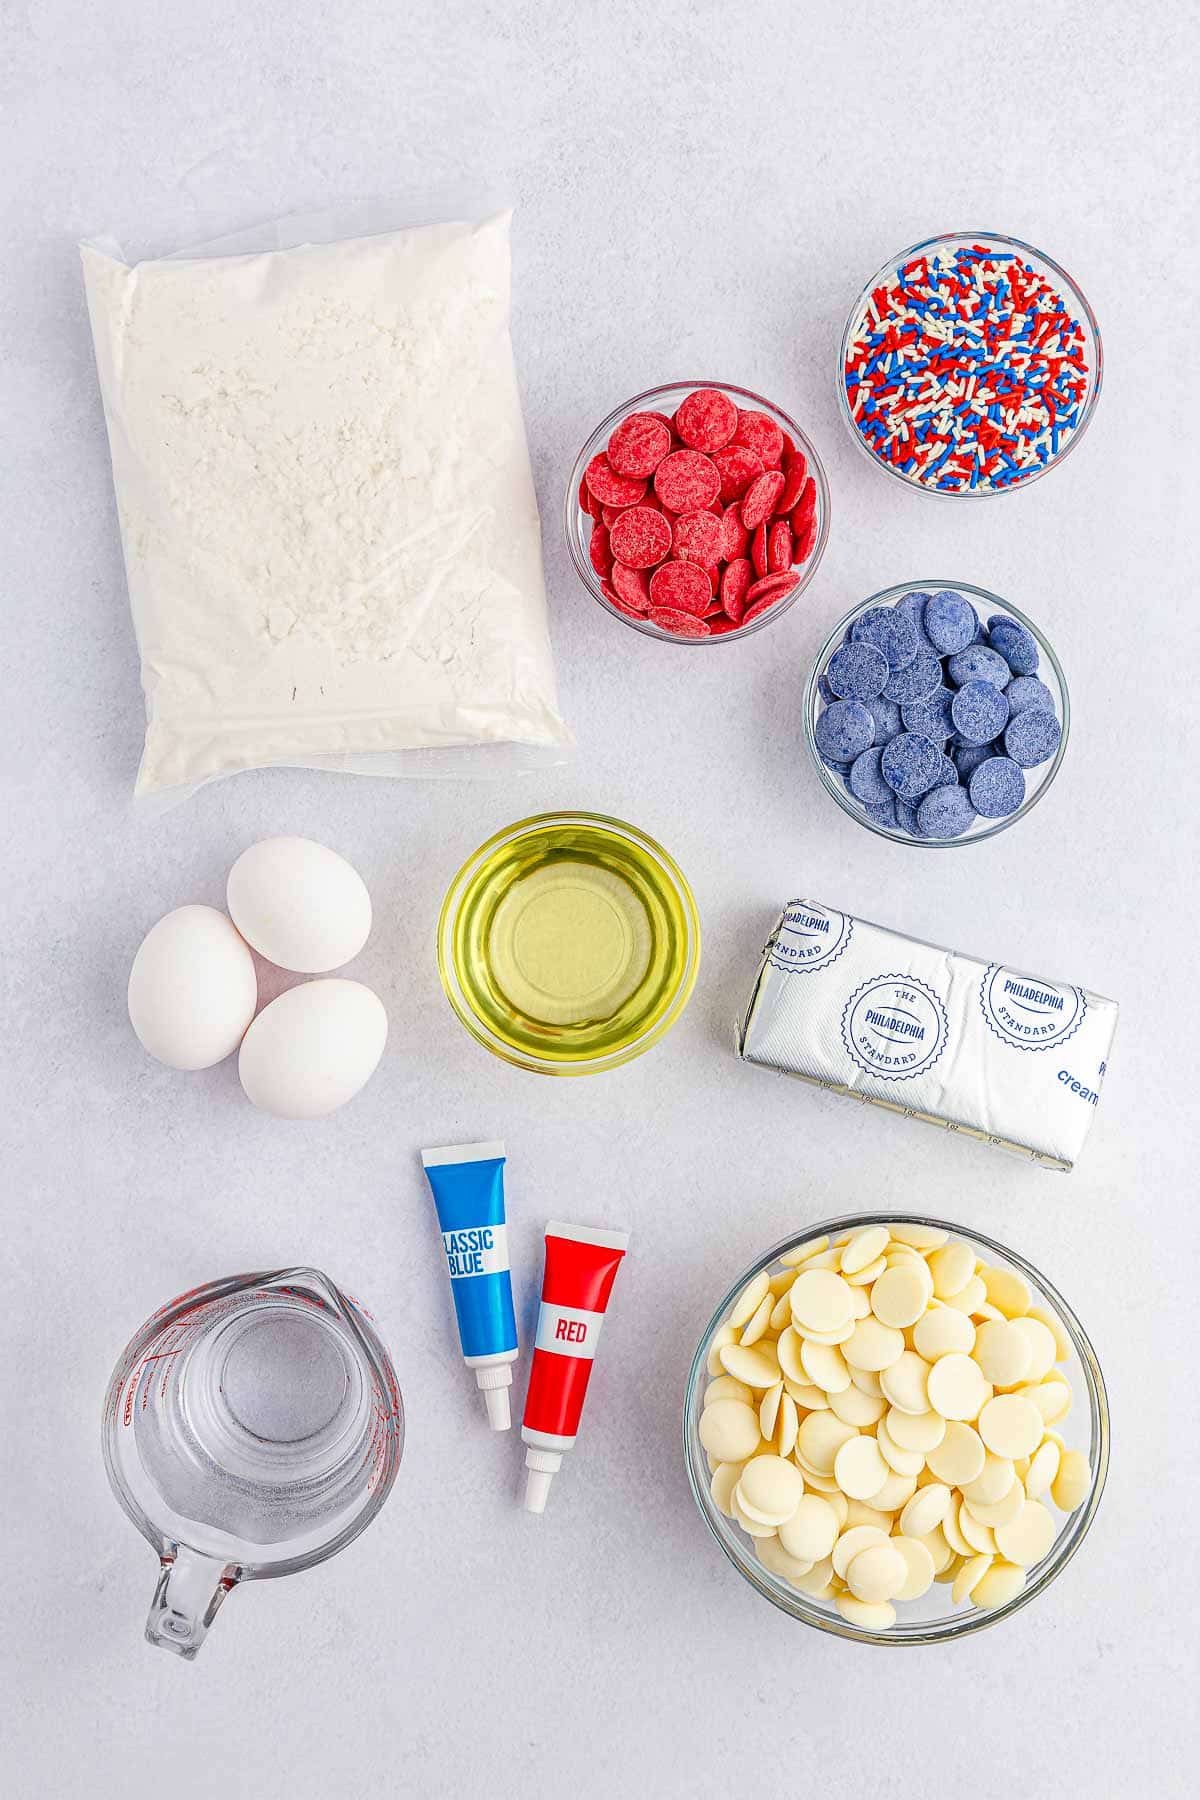 ingredients for red white and blue cake balls - white cake mix, 3 eggs, oil, cream cheese, and red white and blue candy melting wafers.